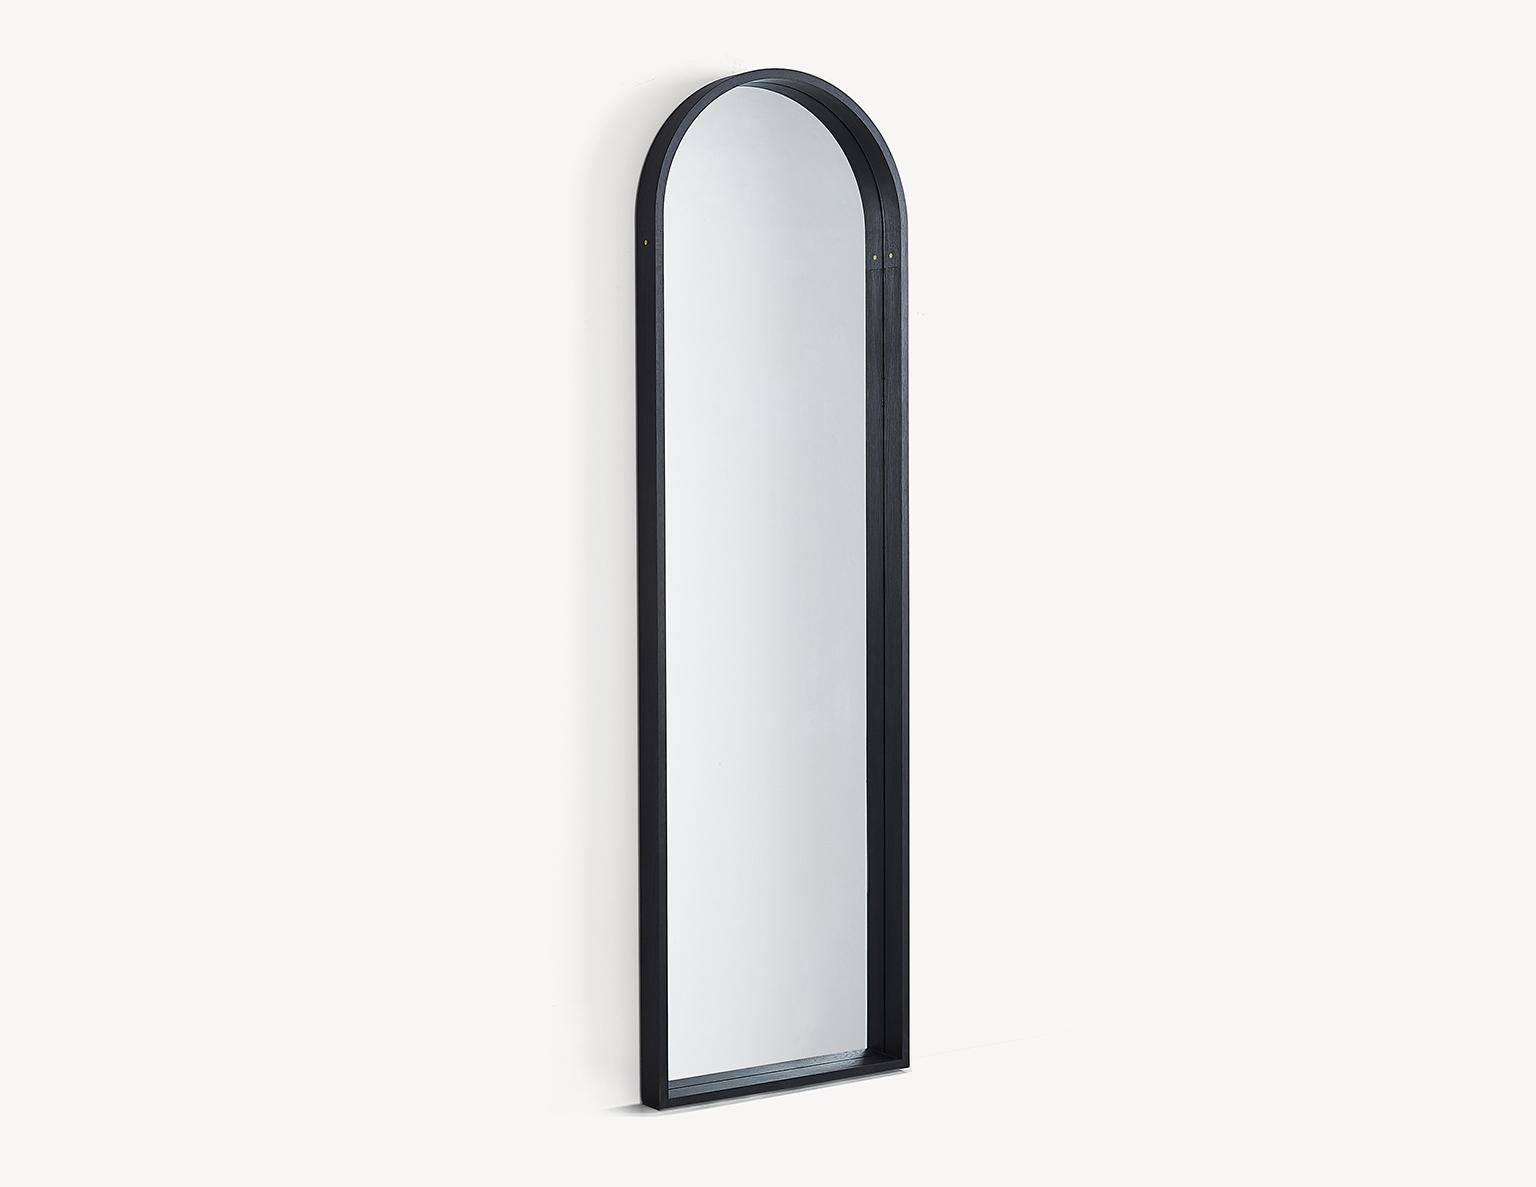 The contemporary Euclid mirror pays homage to the arched doorways that featured in Shaker architecture. The steam-bent arch is connected with brass pinned lap joints and the base of the frame features half-blind dovetails. The mirror floats off the